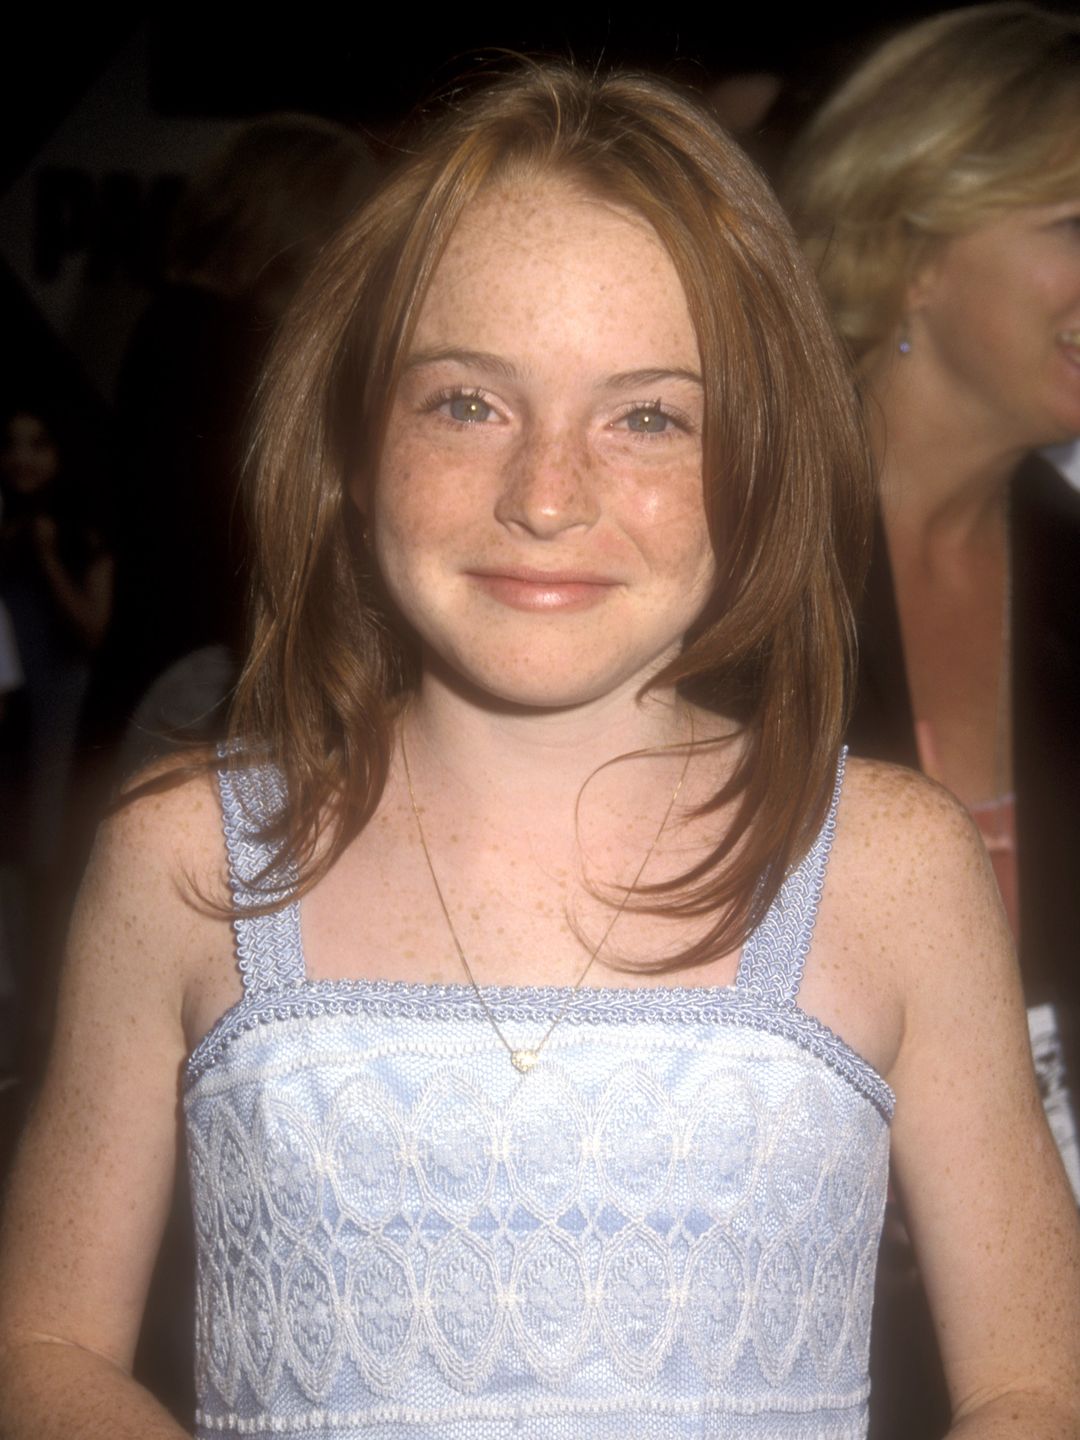 Lindsay Lohan at The Parent Trap premiere in 1998